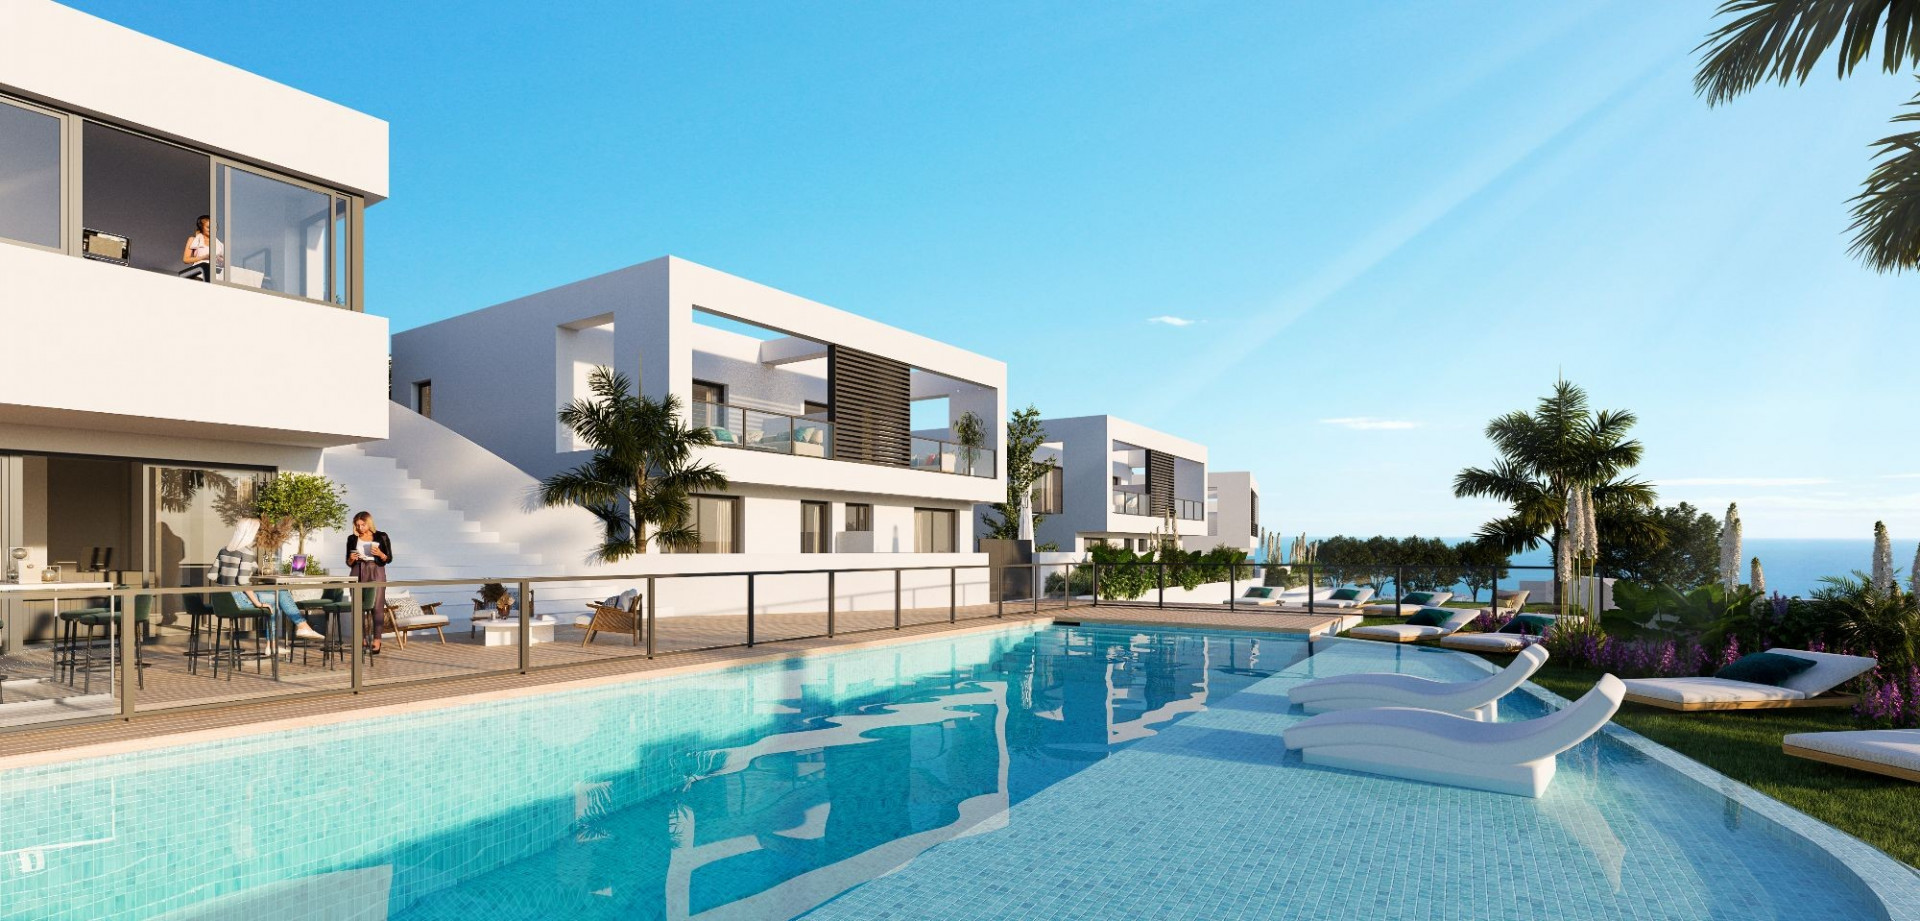 Off plan complex of luxury semidetached houses for sale in Riviera del Sol